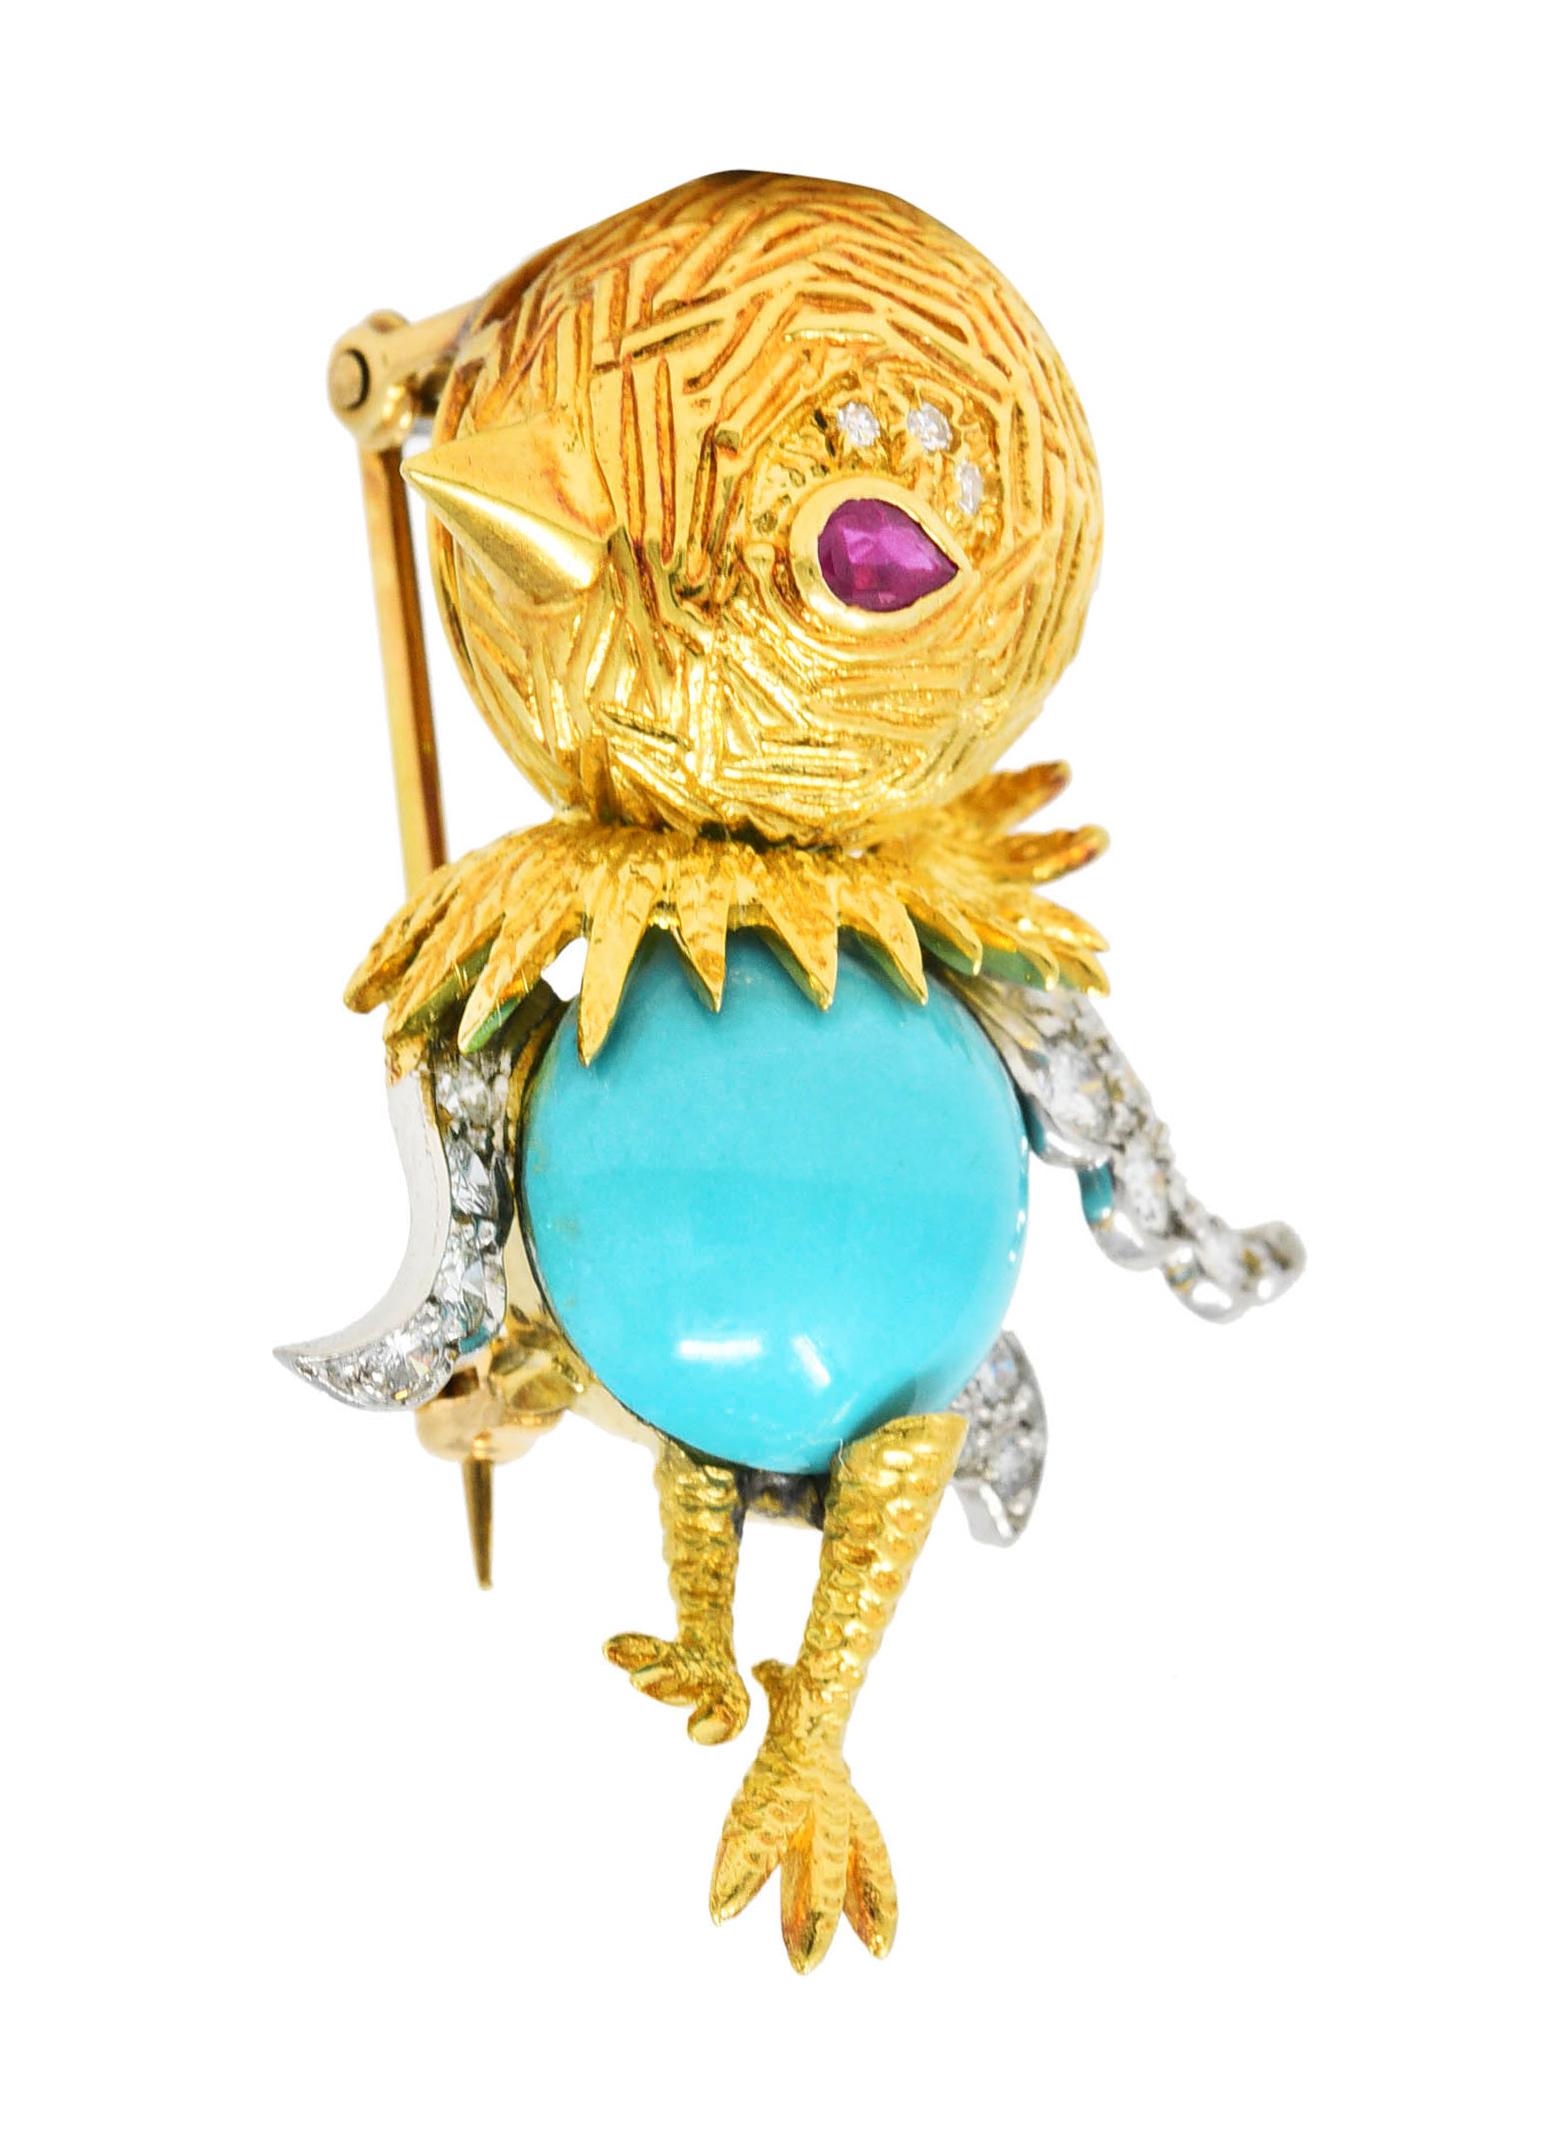 Brooch is designed as a stylized cartoon-like bird with texturous head and legs. Featuring a round turquoise cabochon body measuring 12.0 x 12.0 mm. Opaque light blue in color with subtle light mottling - set by wings and legs. With platinum wings